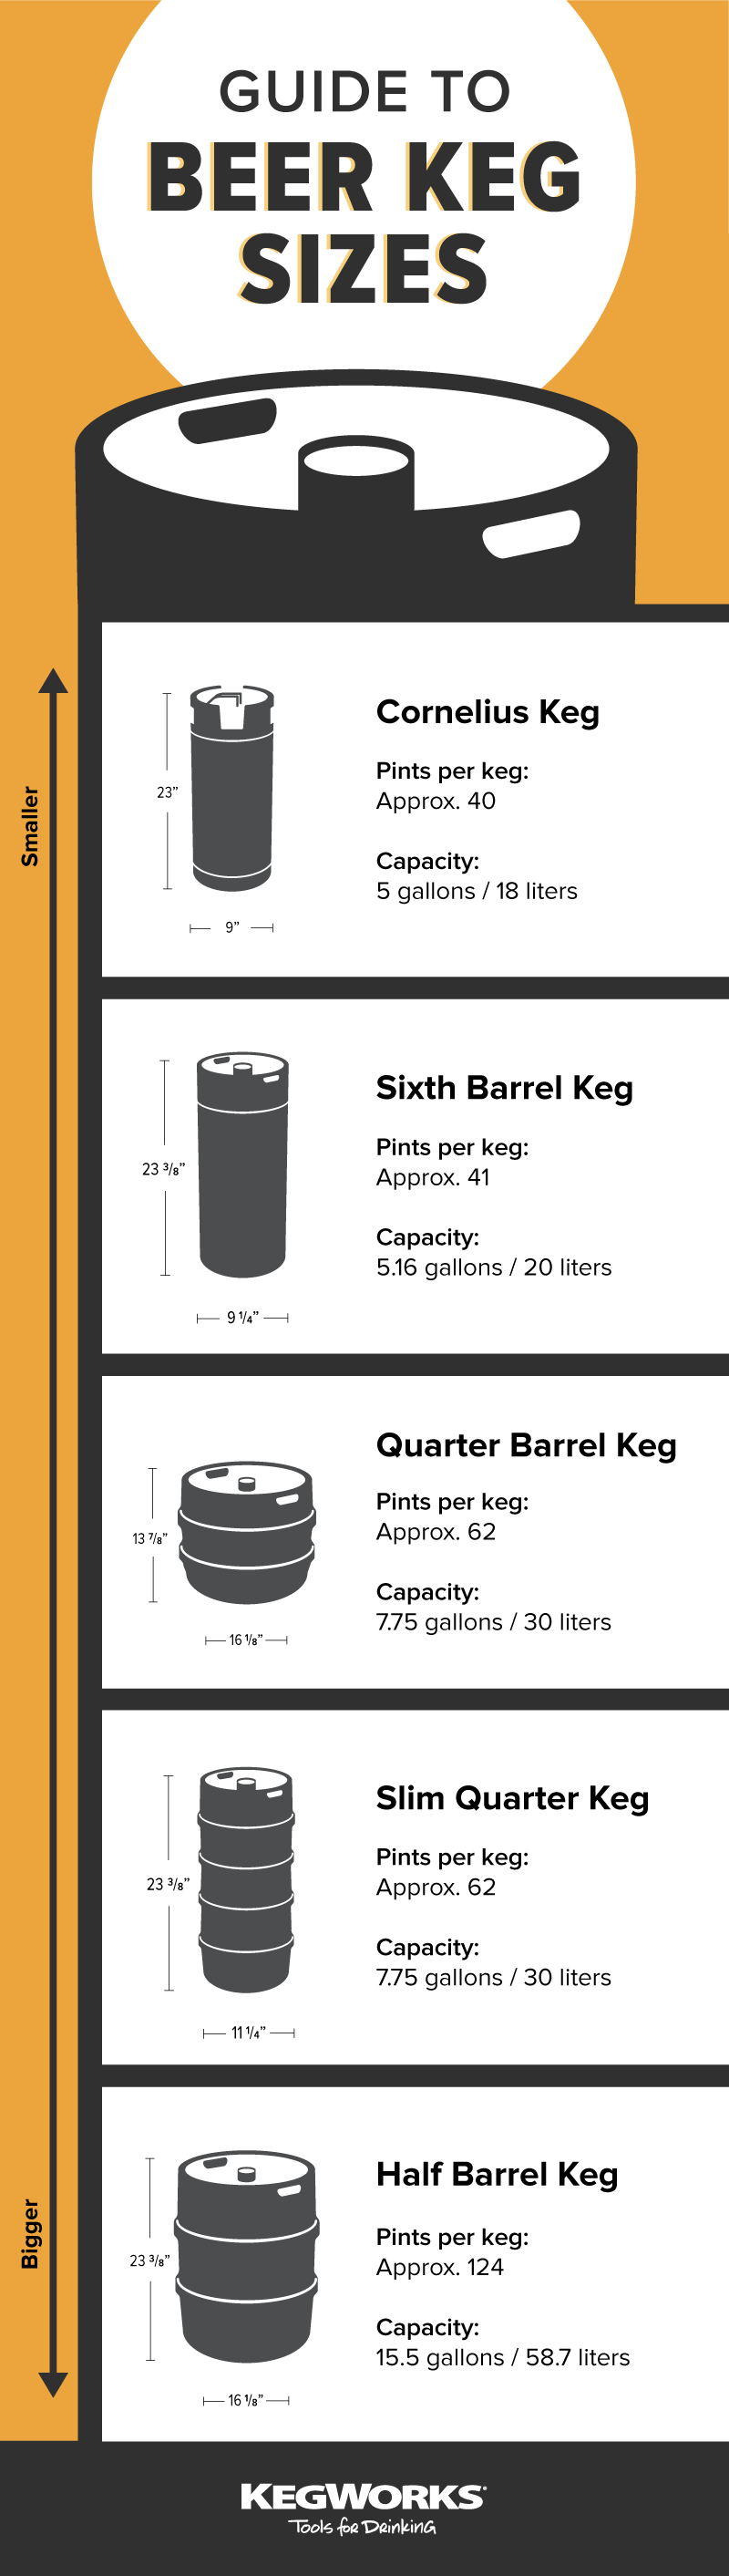 how-many-beers-in-a-keg-guide-to-keg-sizes-and-dimensions